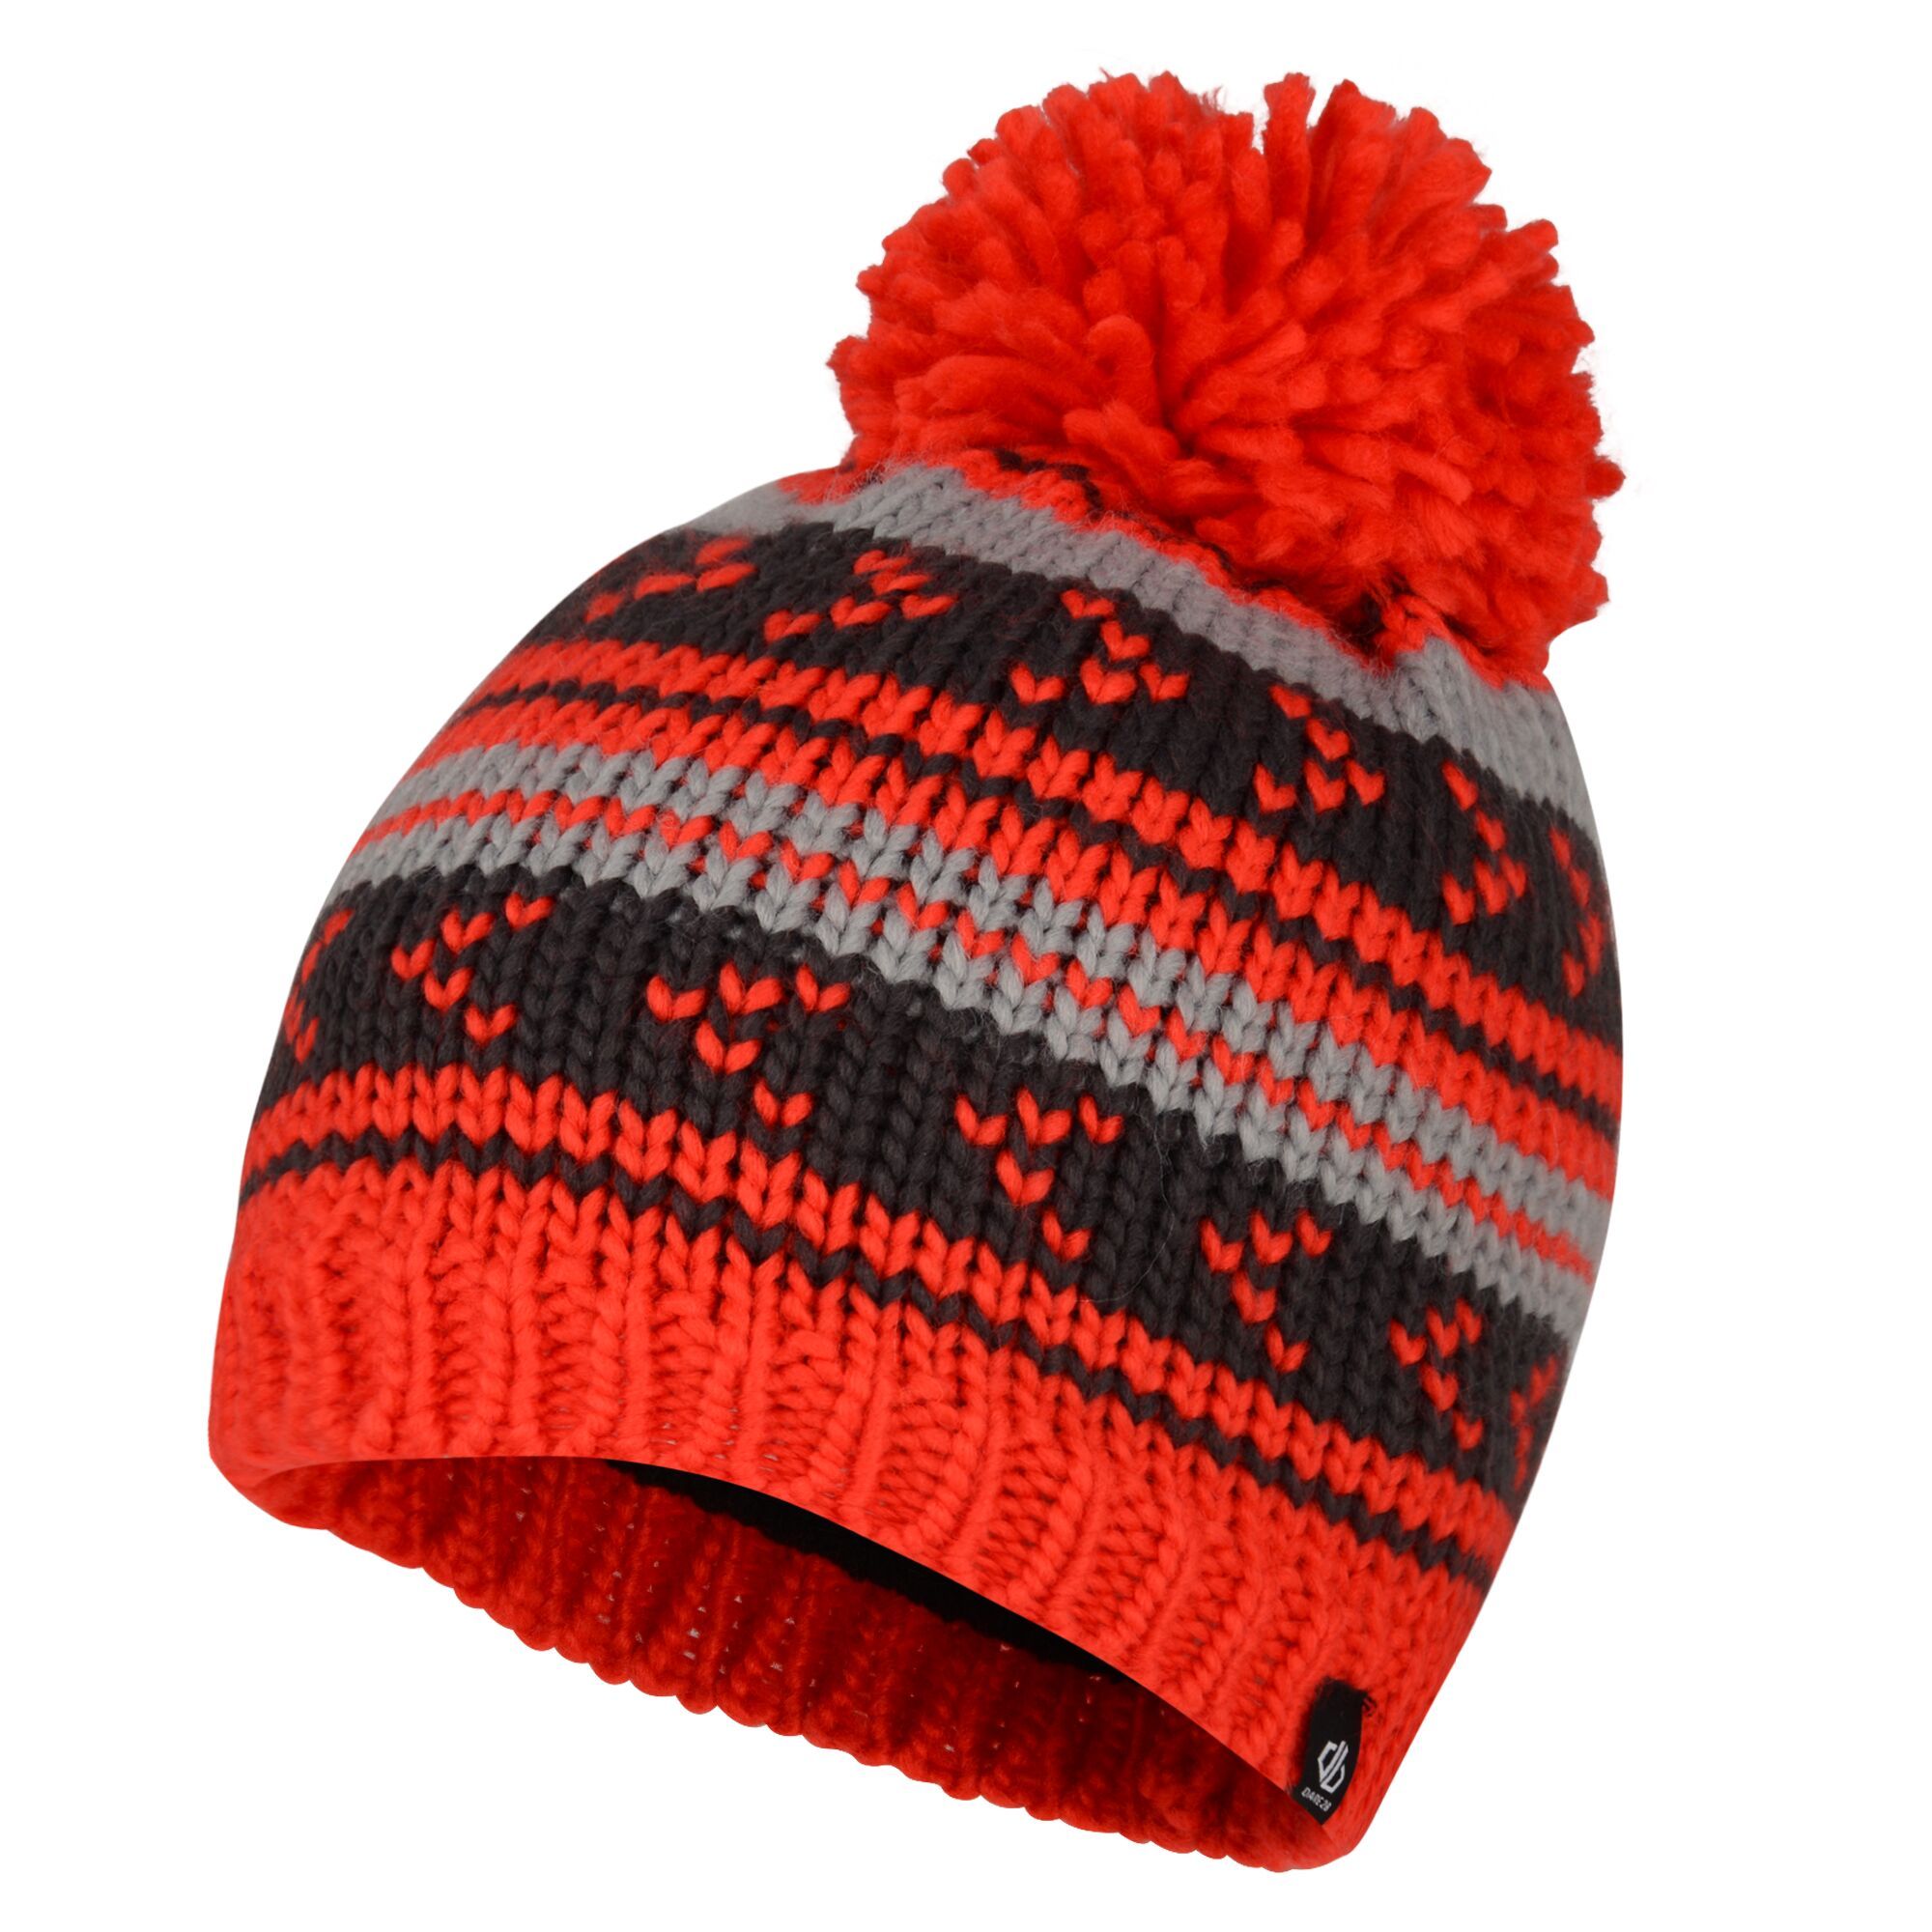 Material: acrylic: 100%. Soft knot construction. Fleece lining. Bobble detail. Knitted ribbed cuff.